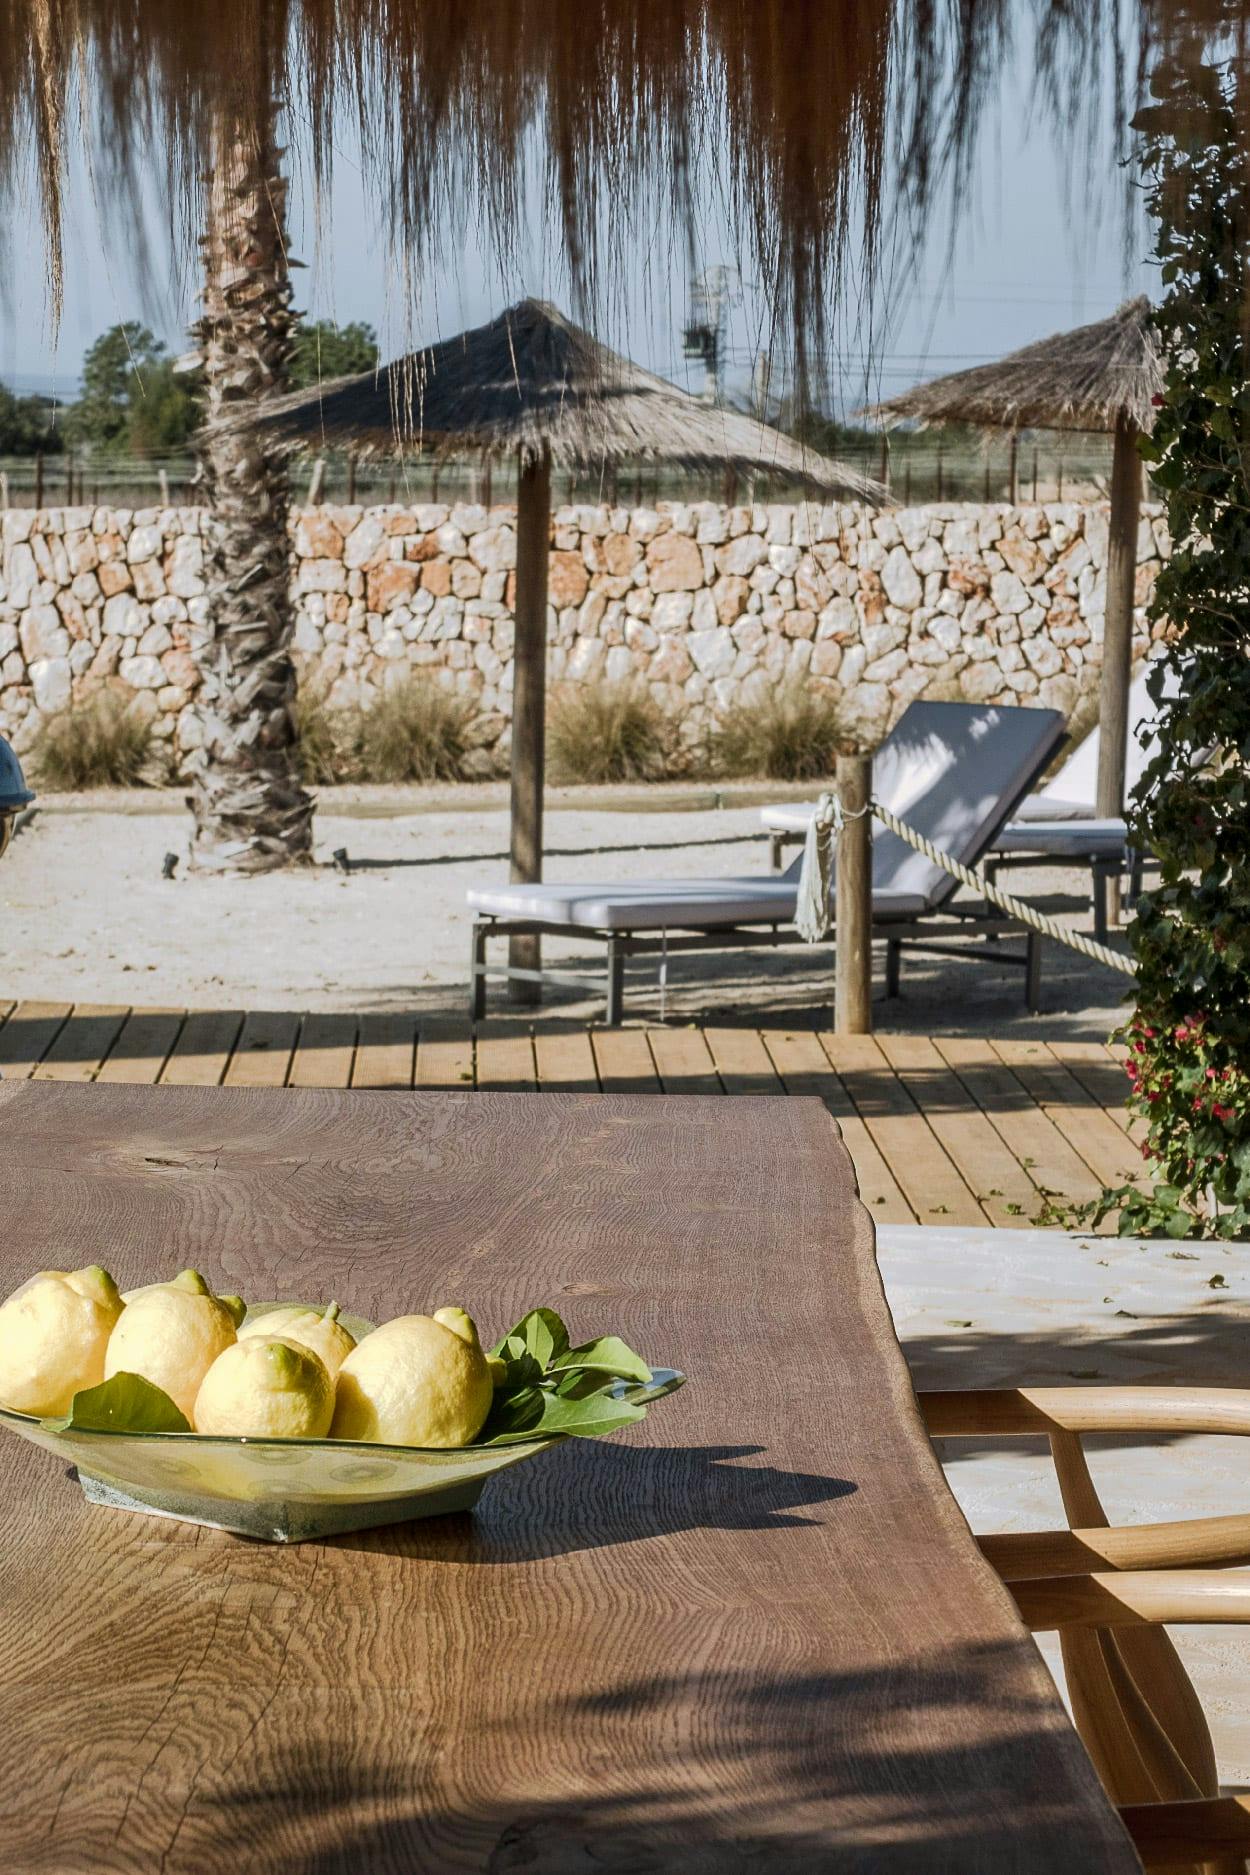 The image features a wooden table with a bowl of lemons and a plate of oranges on it, placed on a patio.